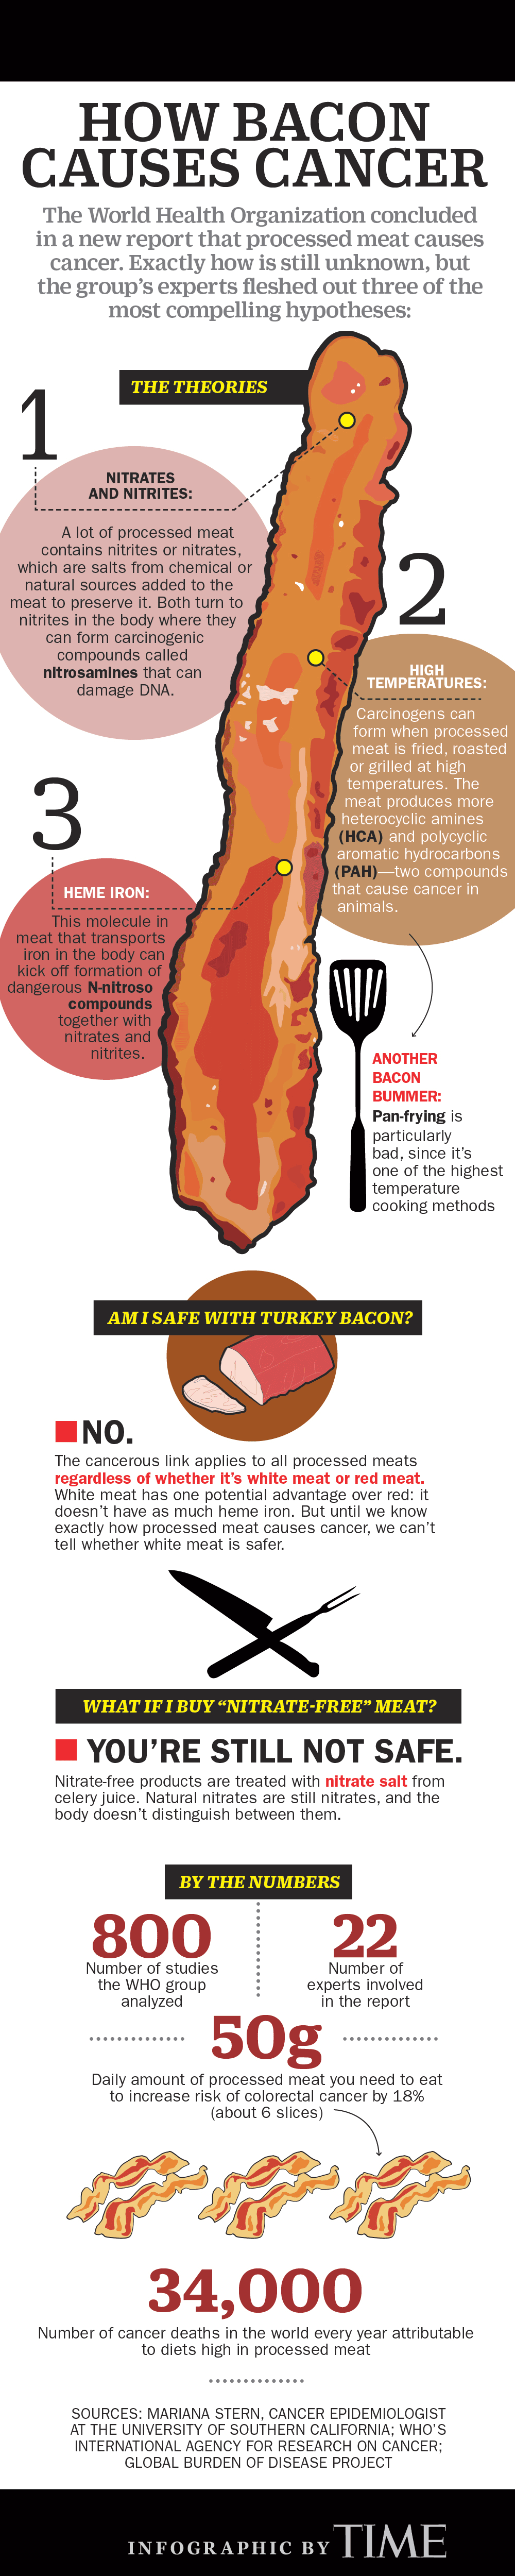 How Bacon Causes Cancer graphic